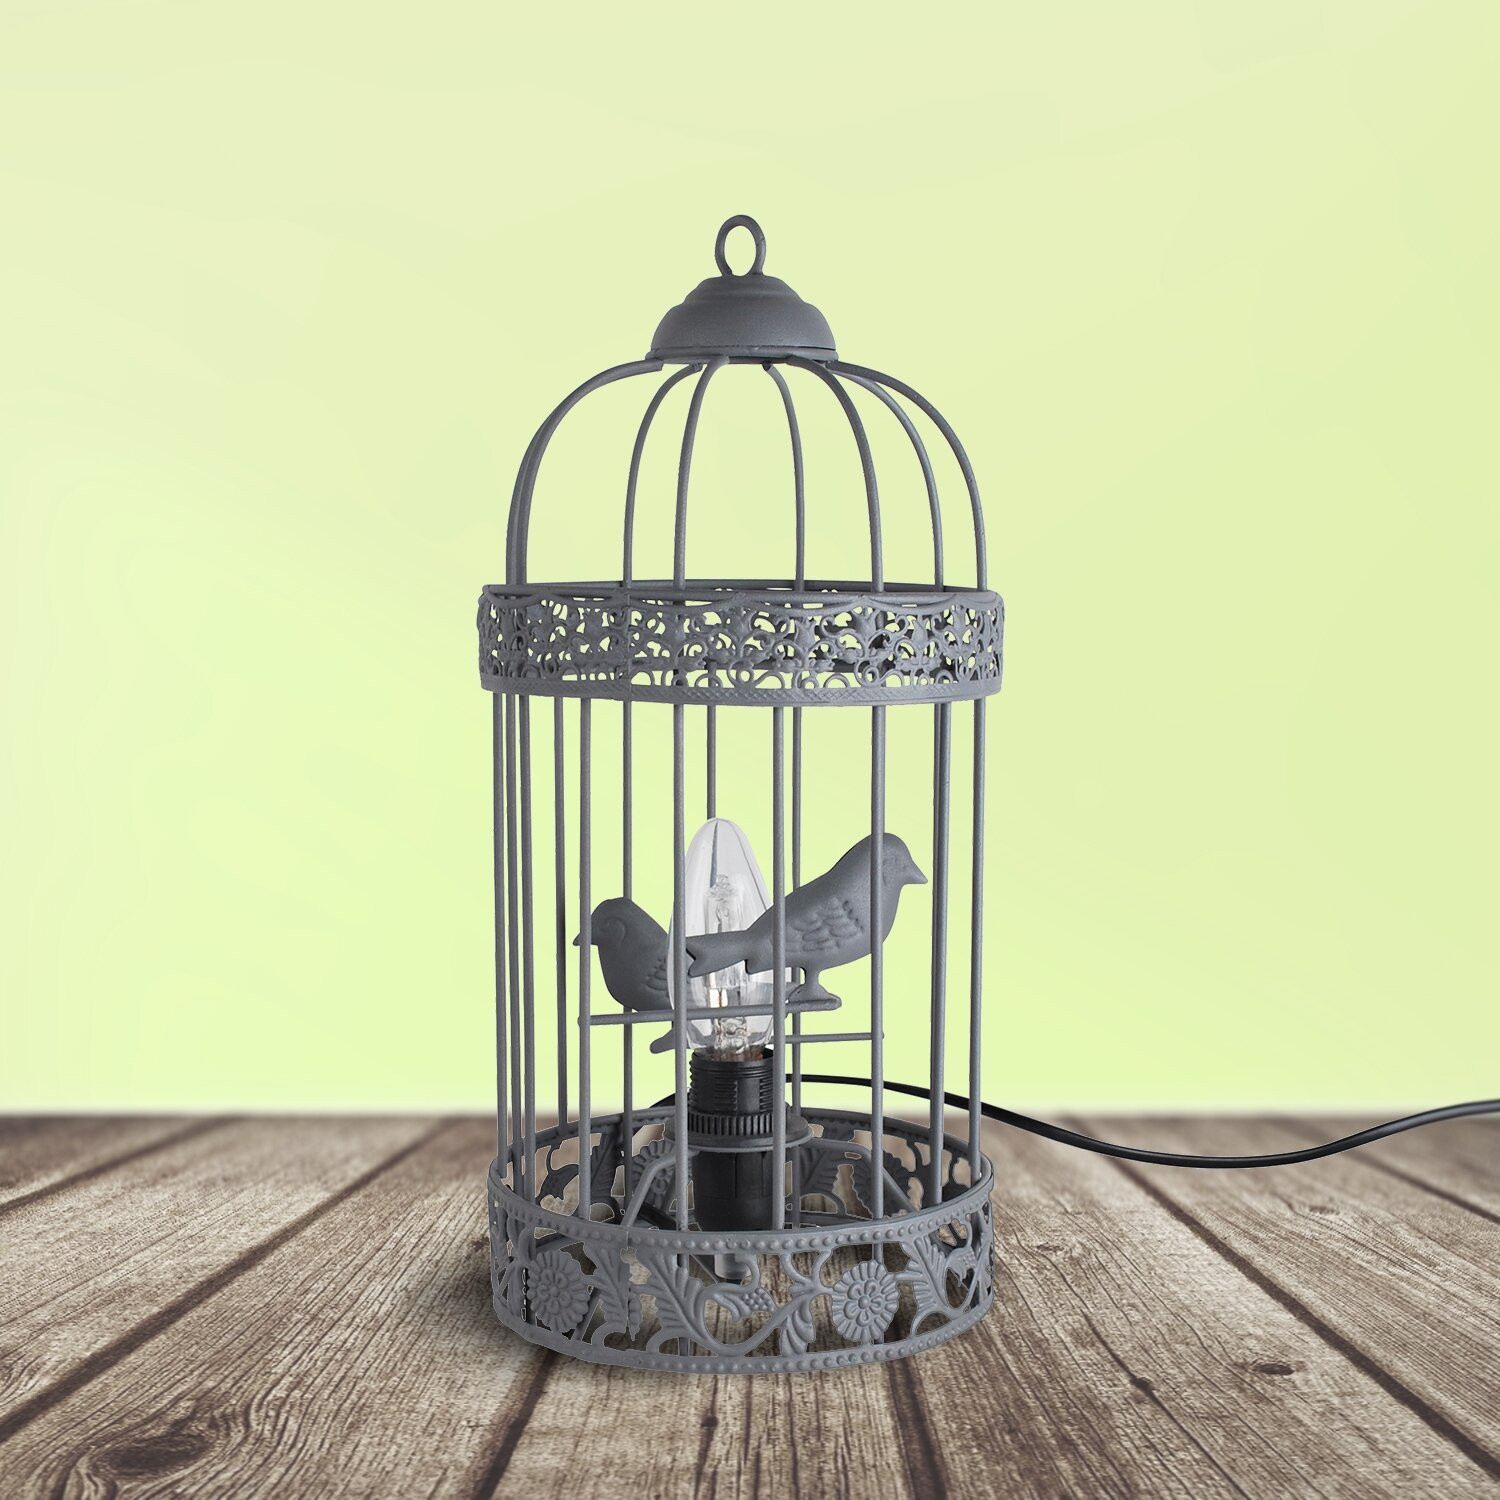 Shabby Chic Bedroom Lamp
 Shabby Chic Grey Birdcage Table Lamp Bedside Light